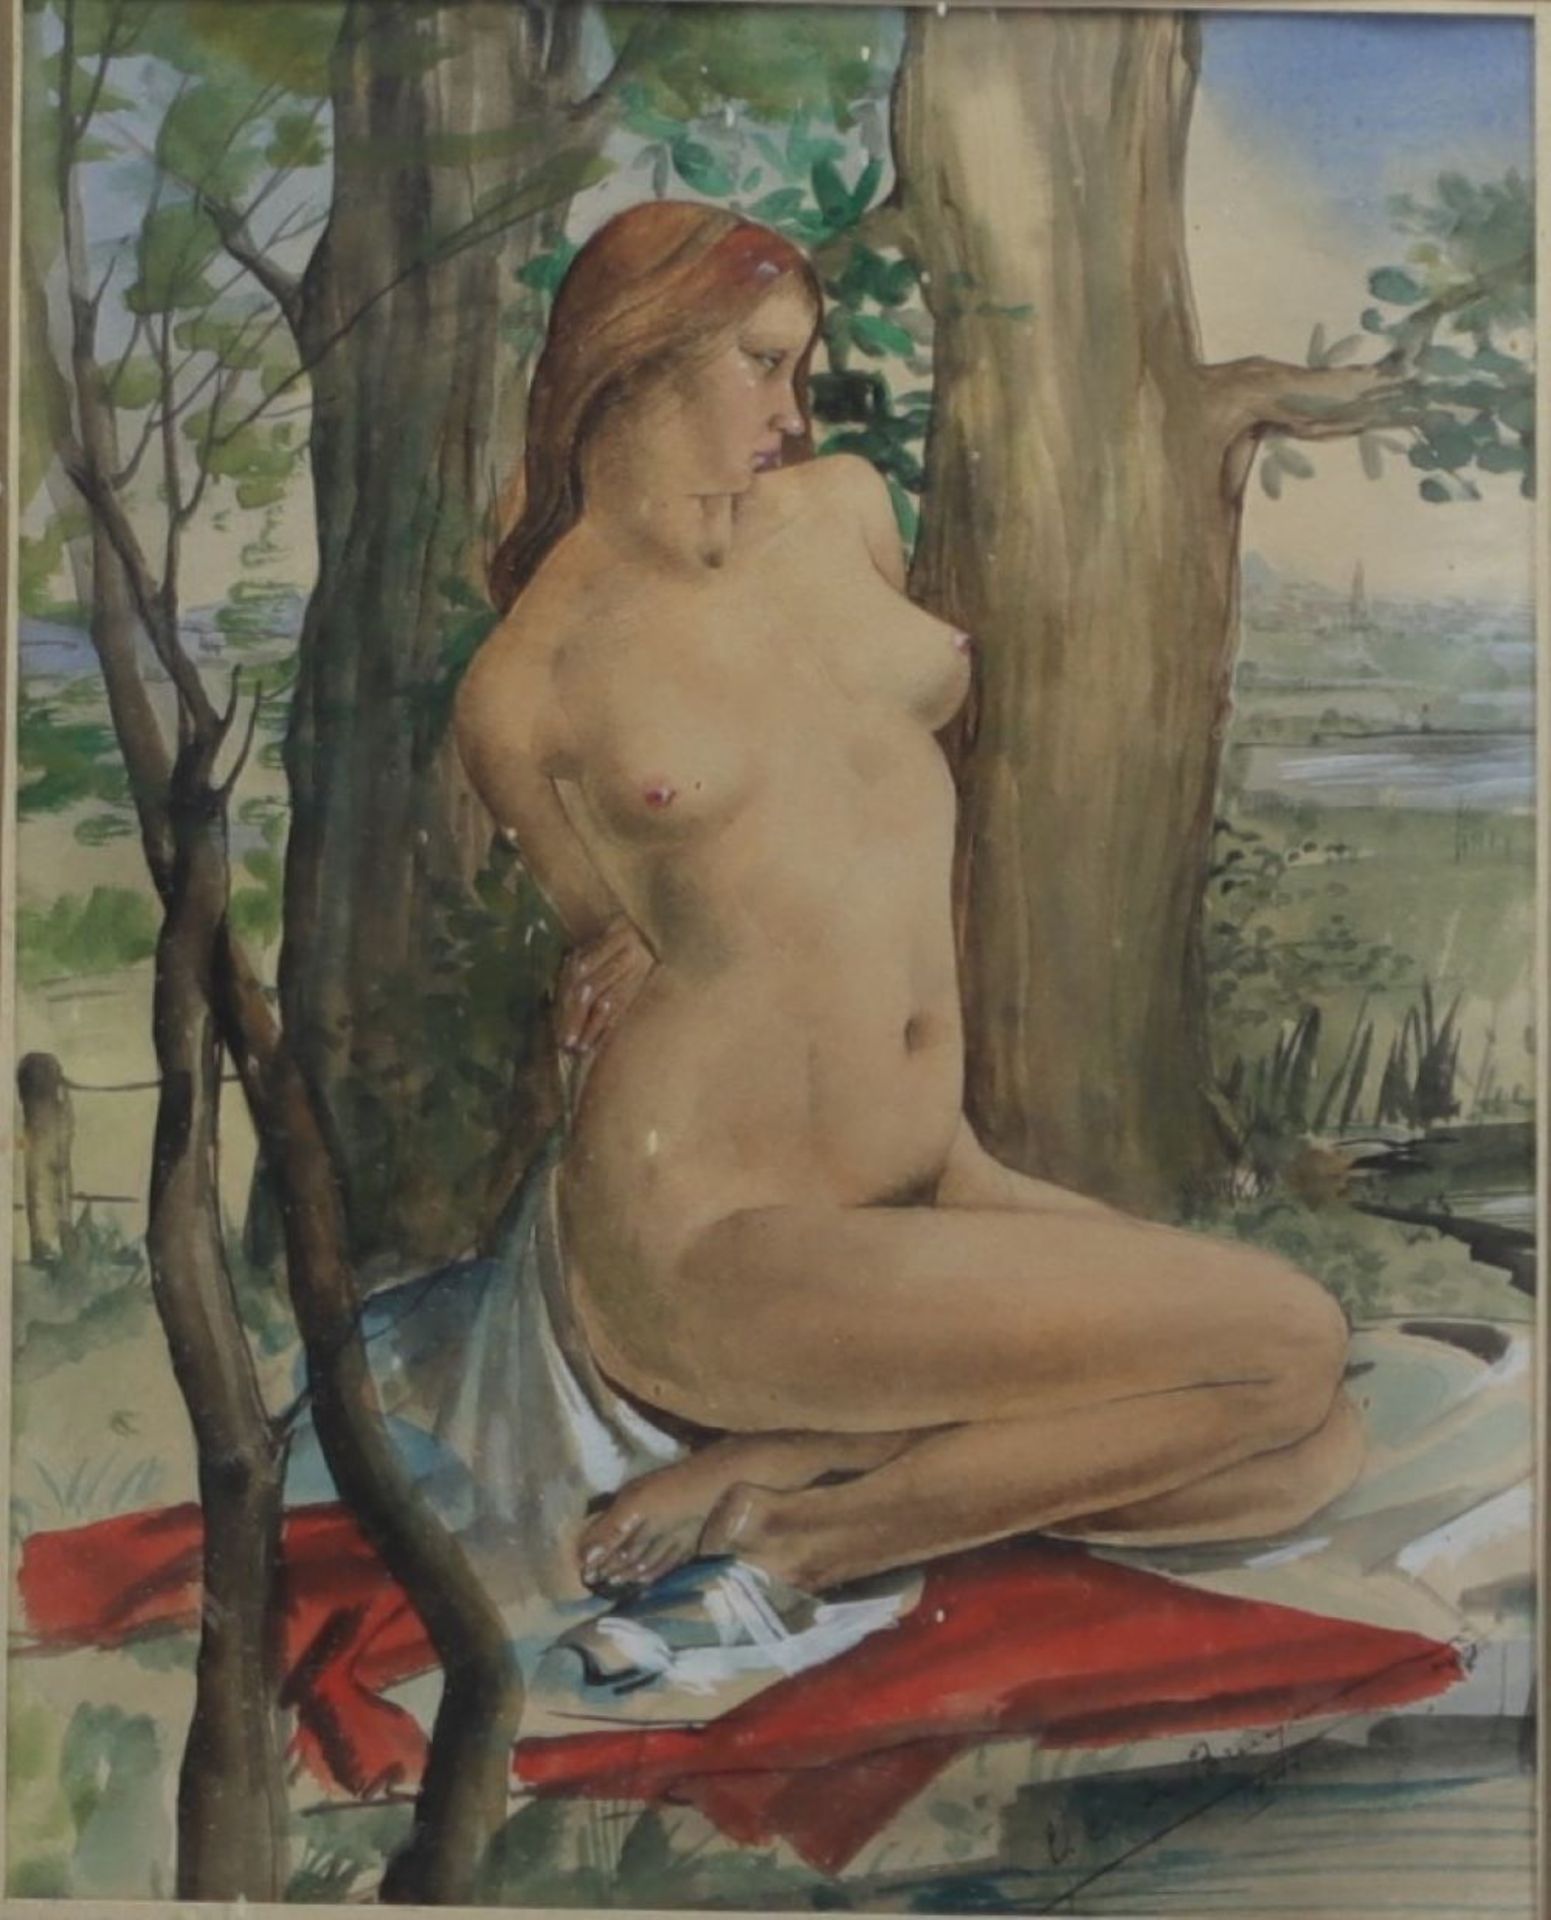 Gustave DE BRUYNE (1914-1981) â€˜Femme denudeeâ€™ Watercolour signed and dated 1944.